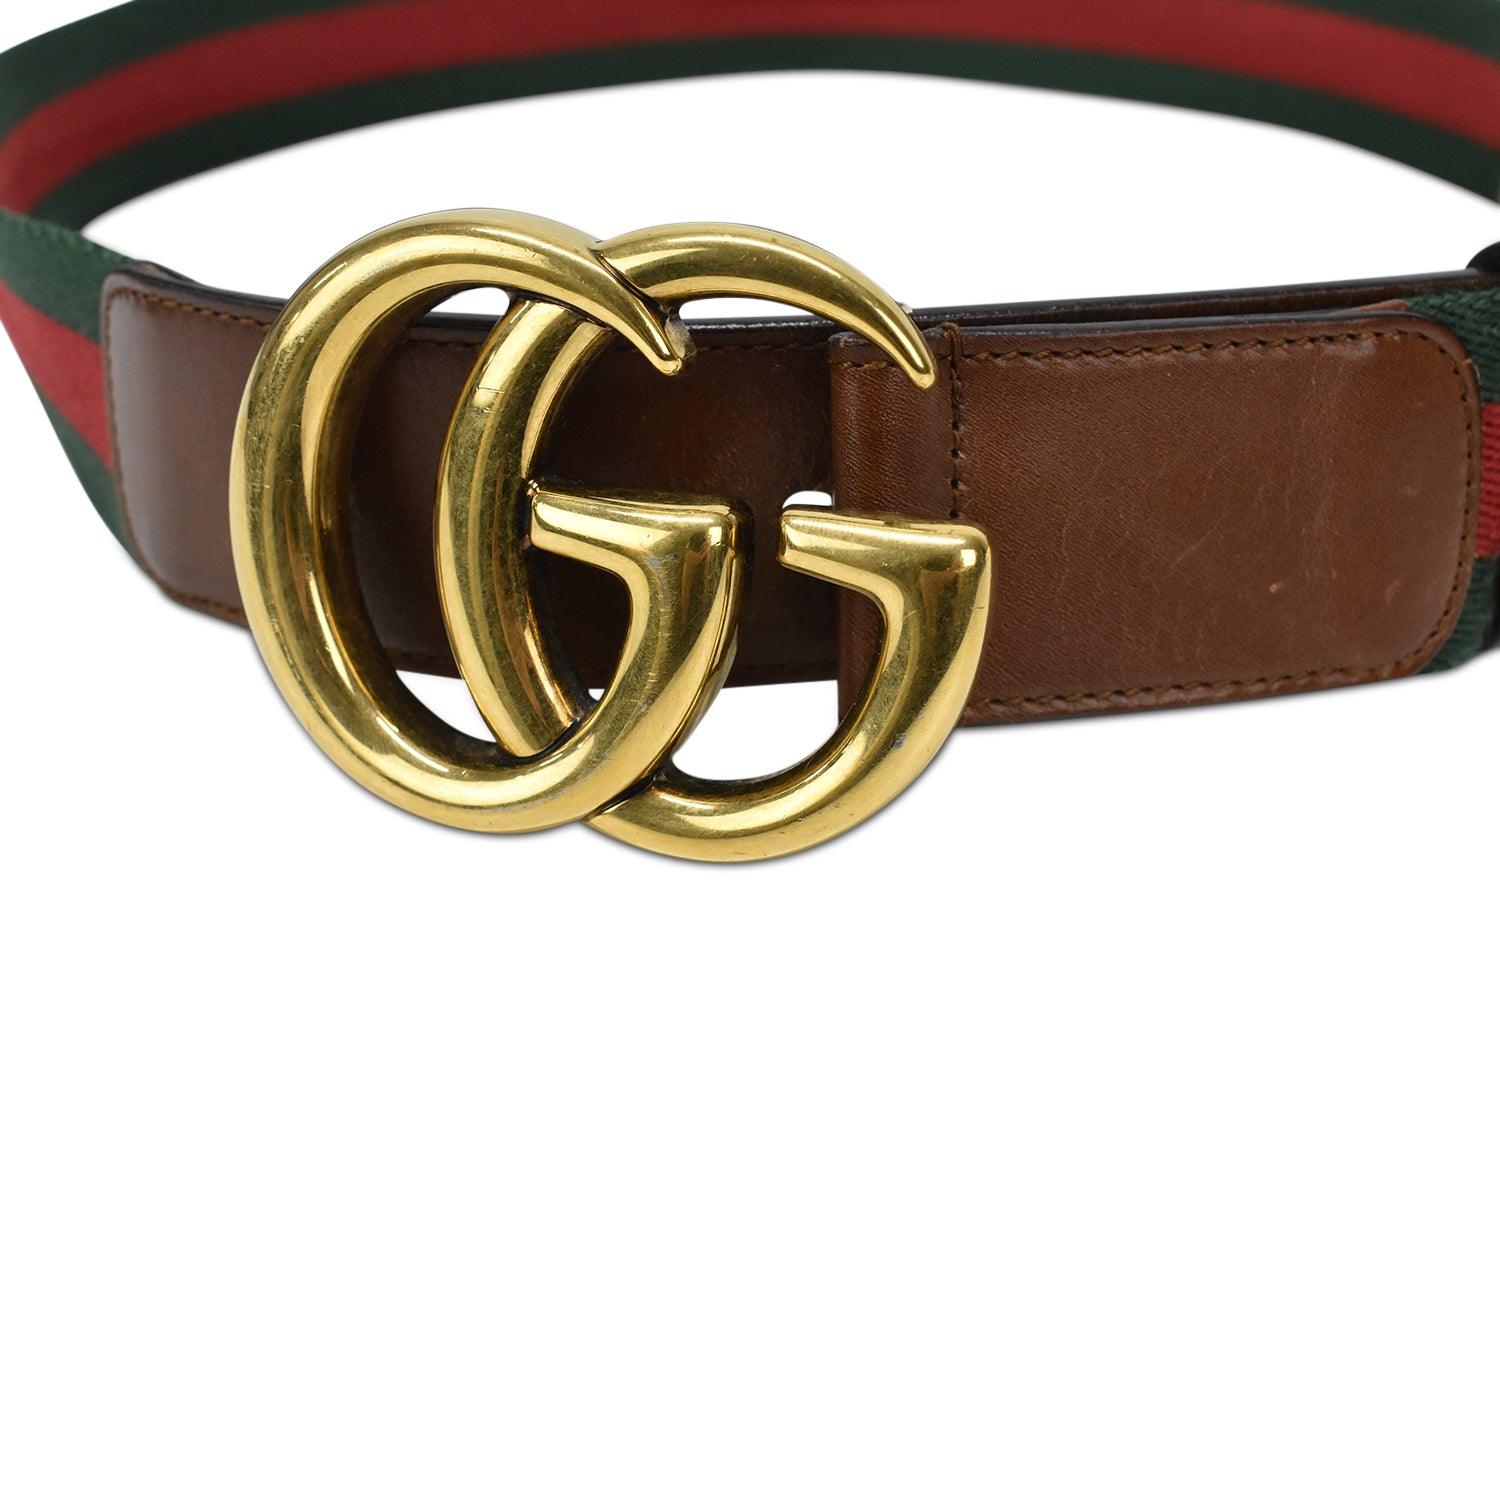 Gucci 'Marmont' Belt - 90/36 - Fashionably Yours